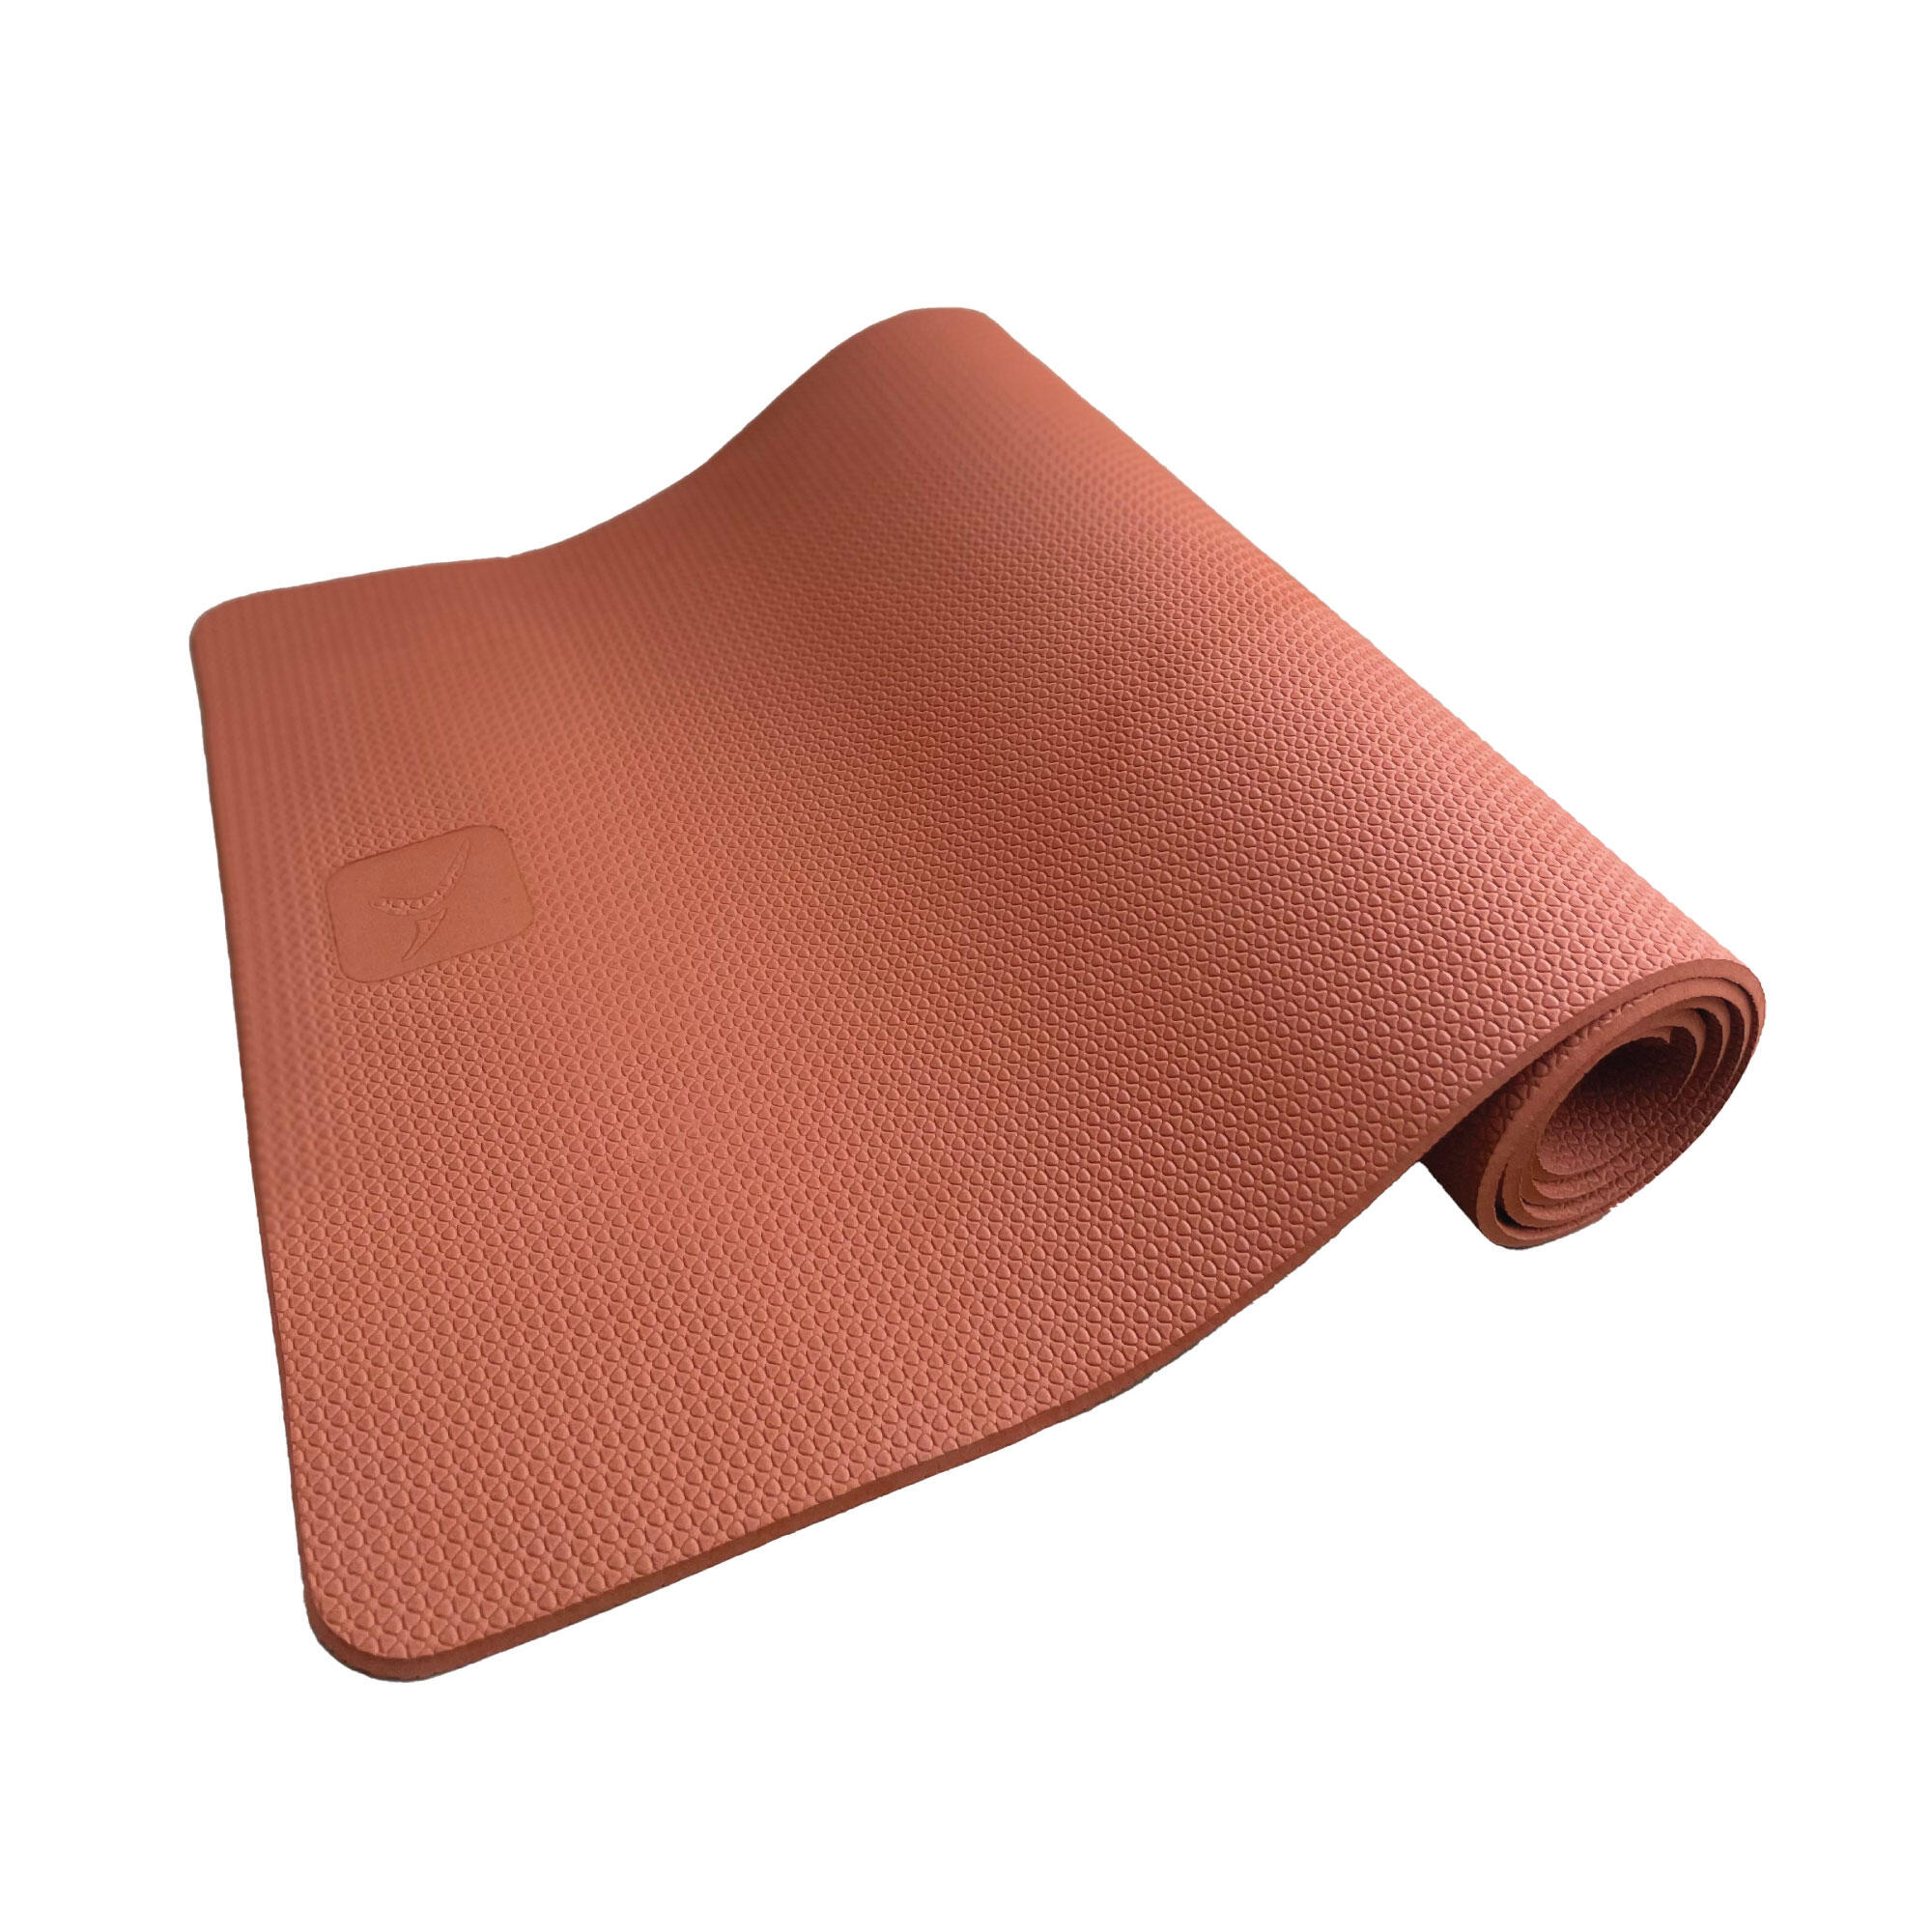 Yoga Mat, 6 mm thick, 183 x 61 cm, with Strap, Foam - Brown, For